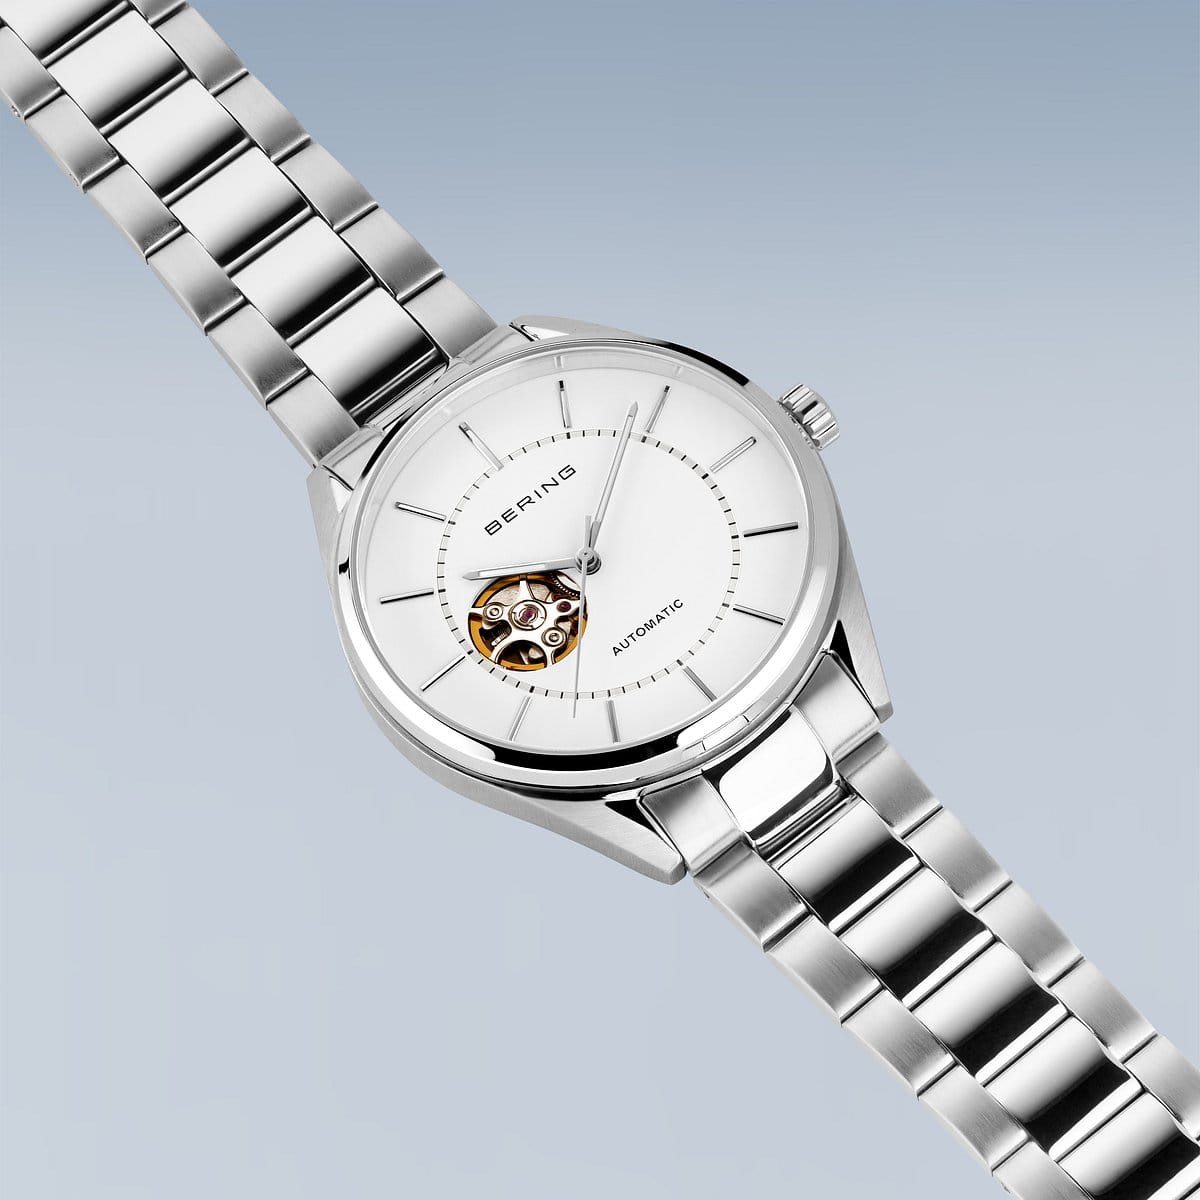 Bering Automatic Polished/Brushed Silver Watch